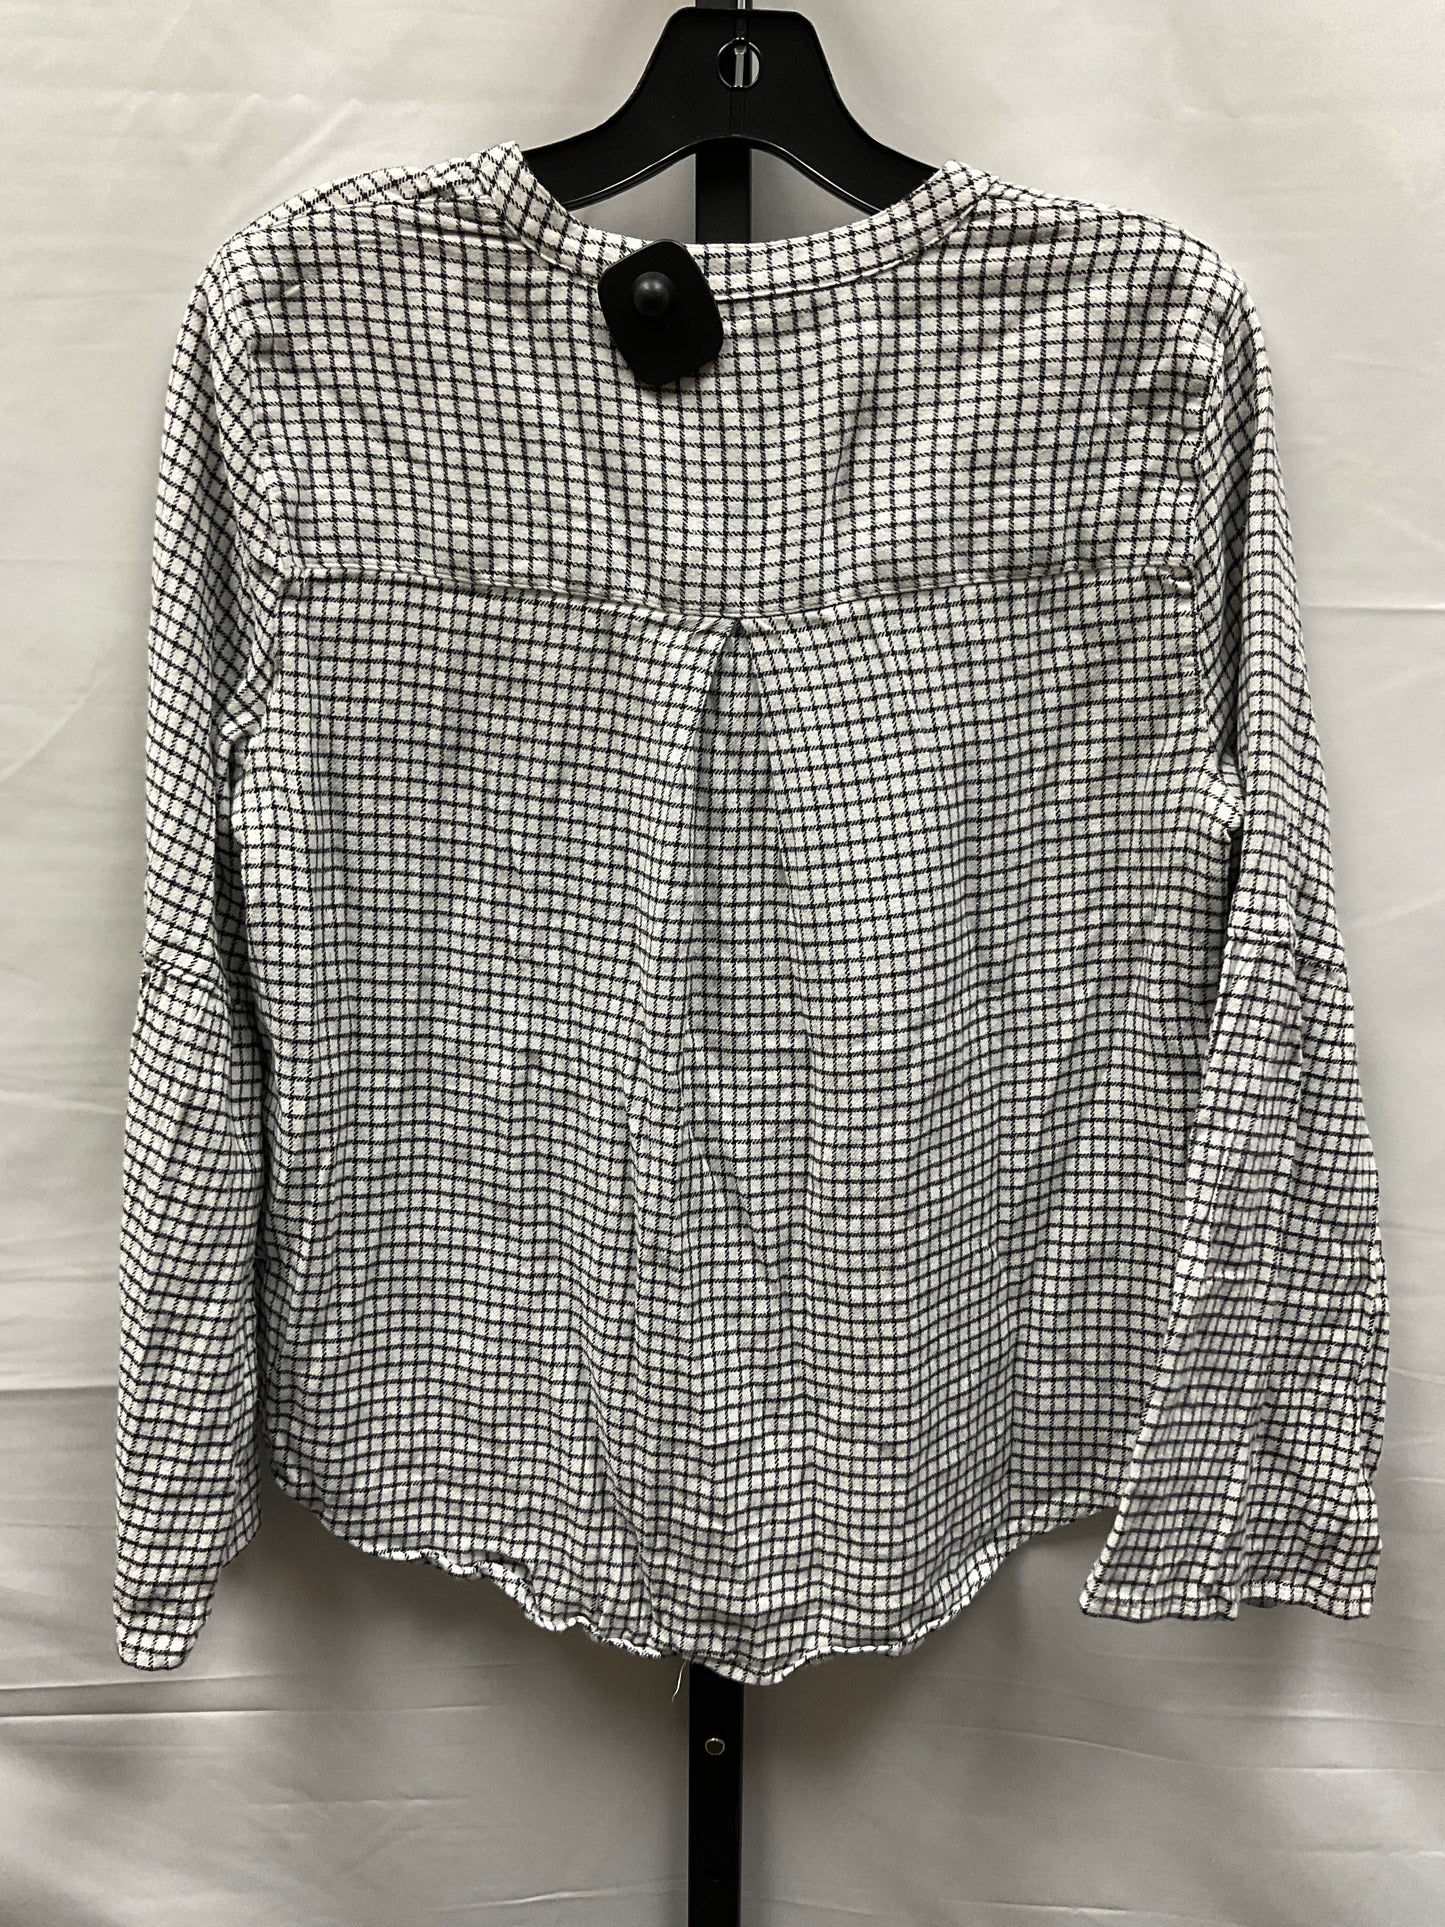 Black & White Top Long Sleeve Madewell, Size M